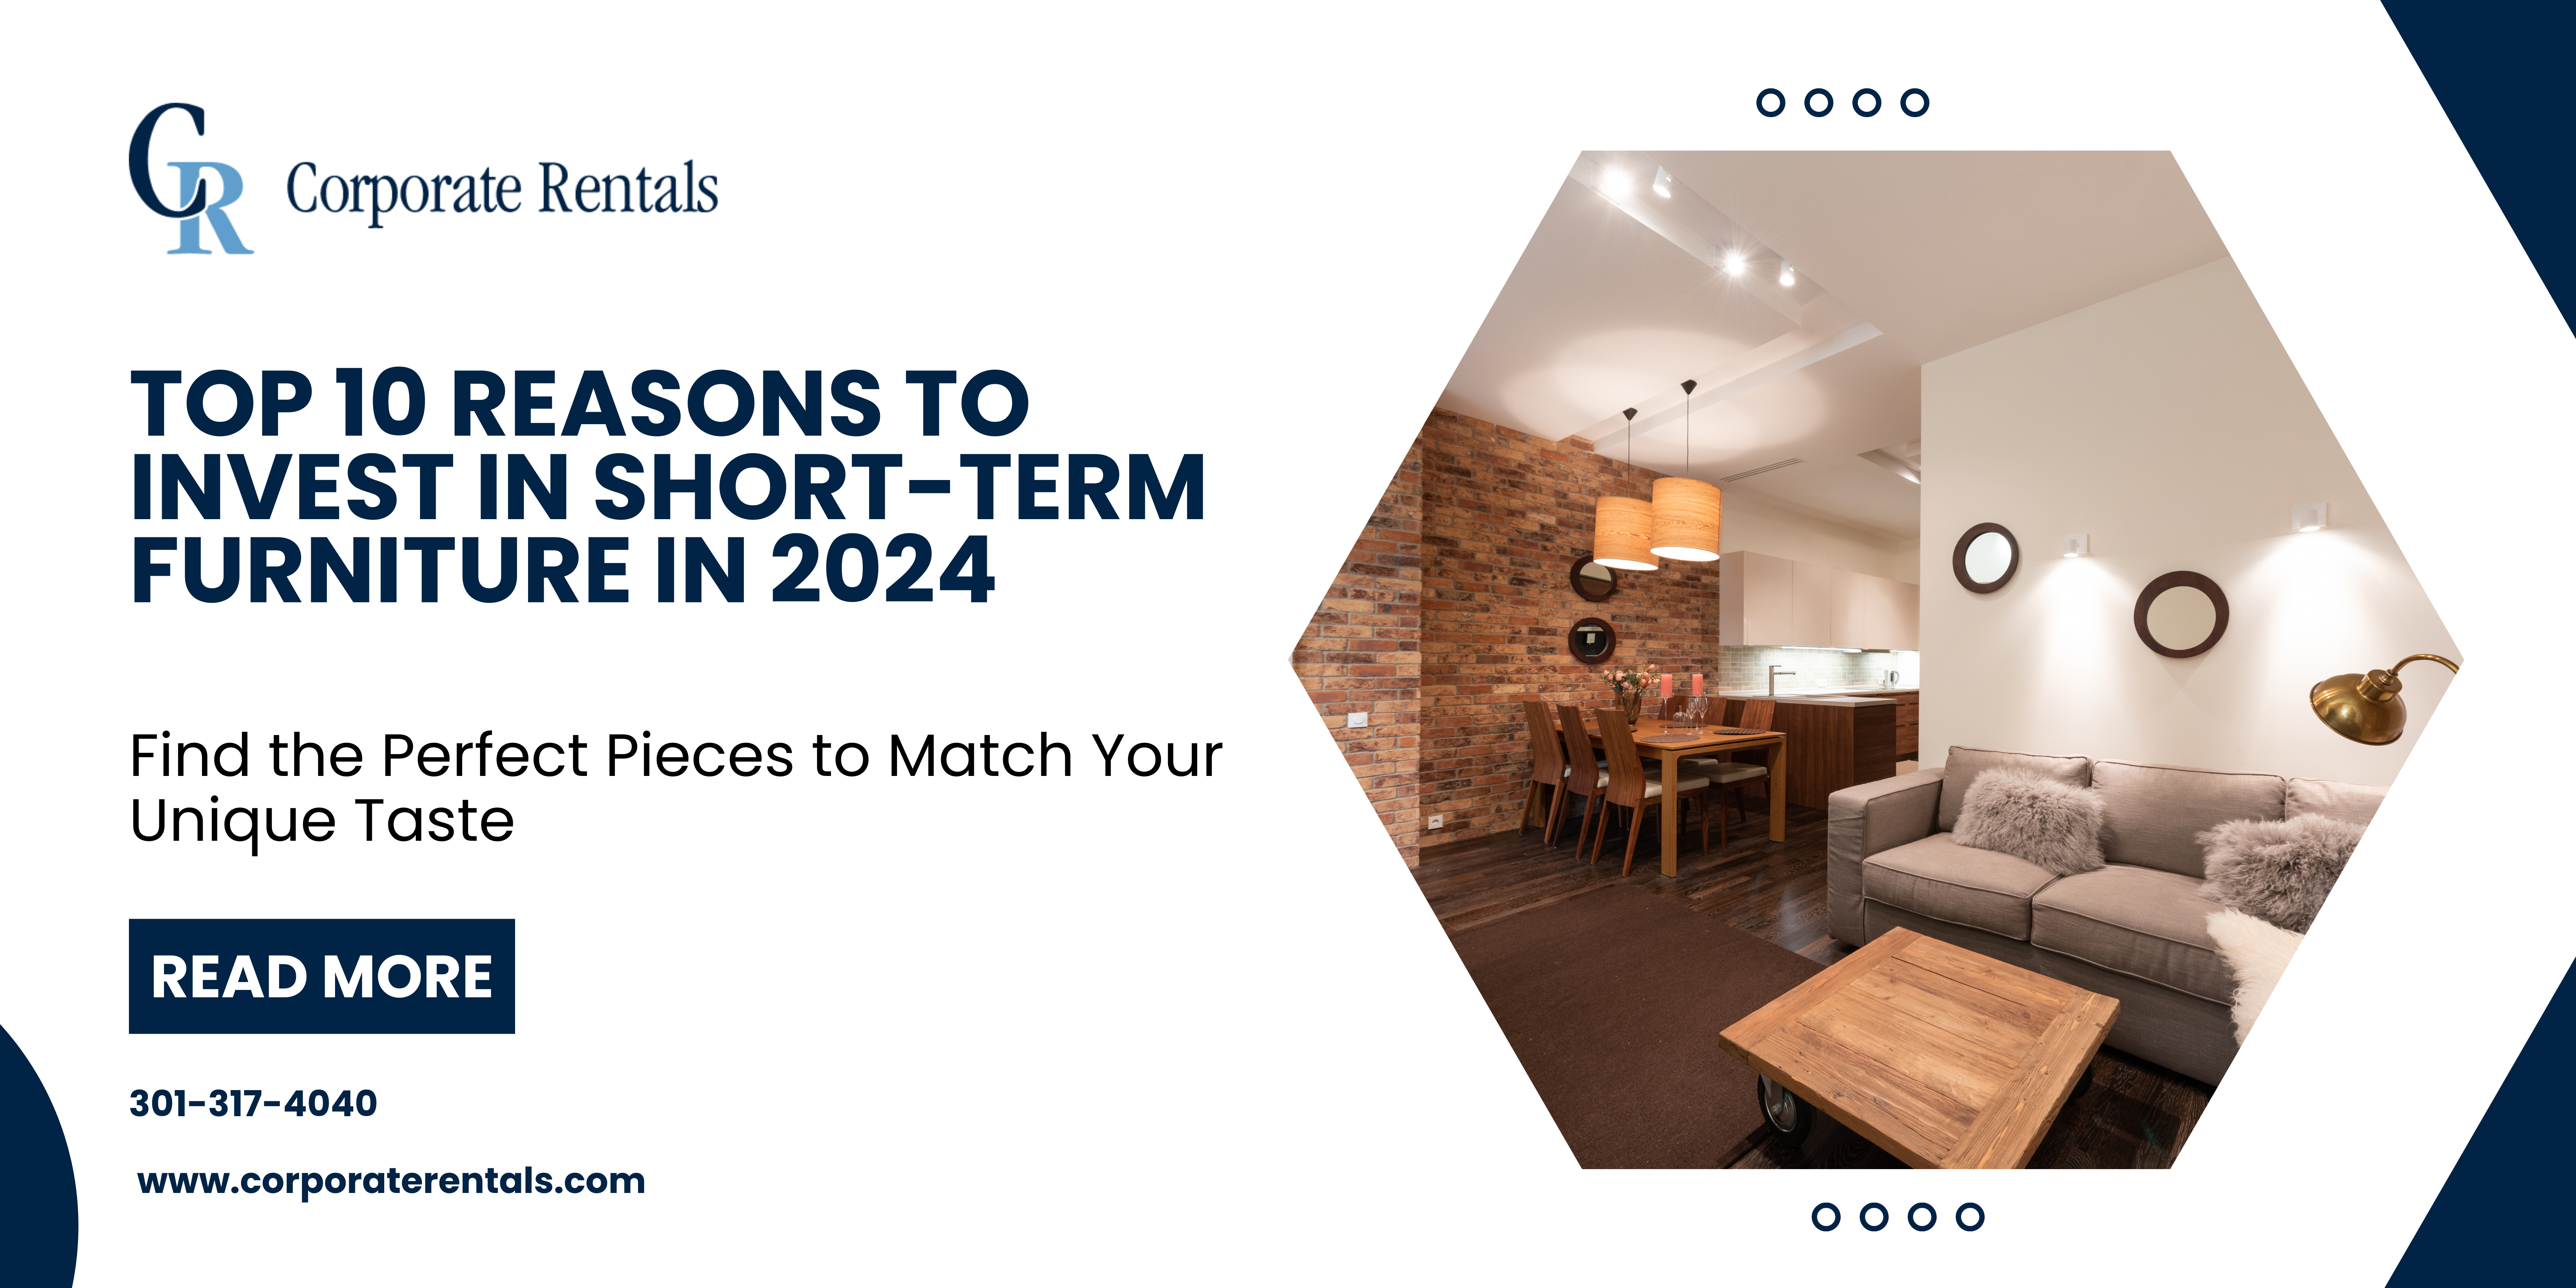 Top 10 Reasons to Invest in Short-Term Furniture in 2024